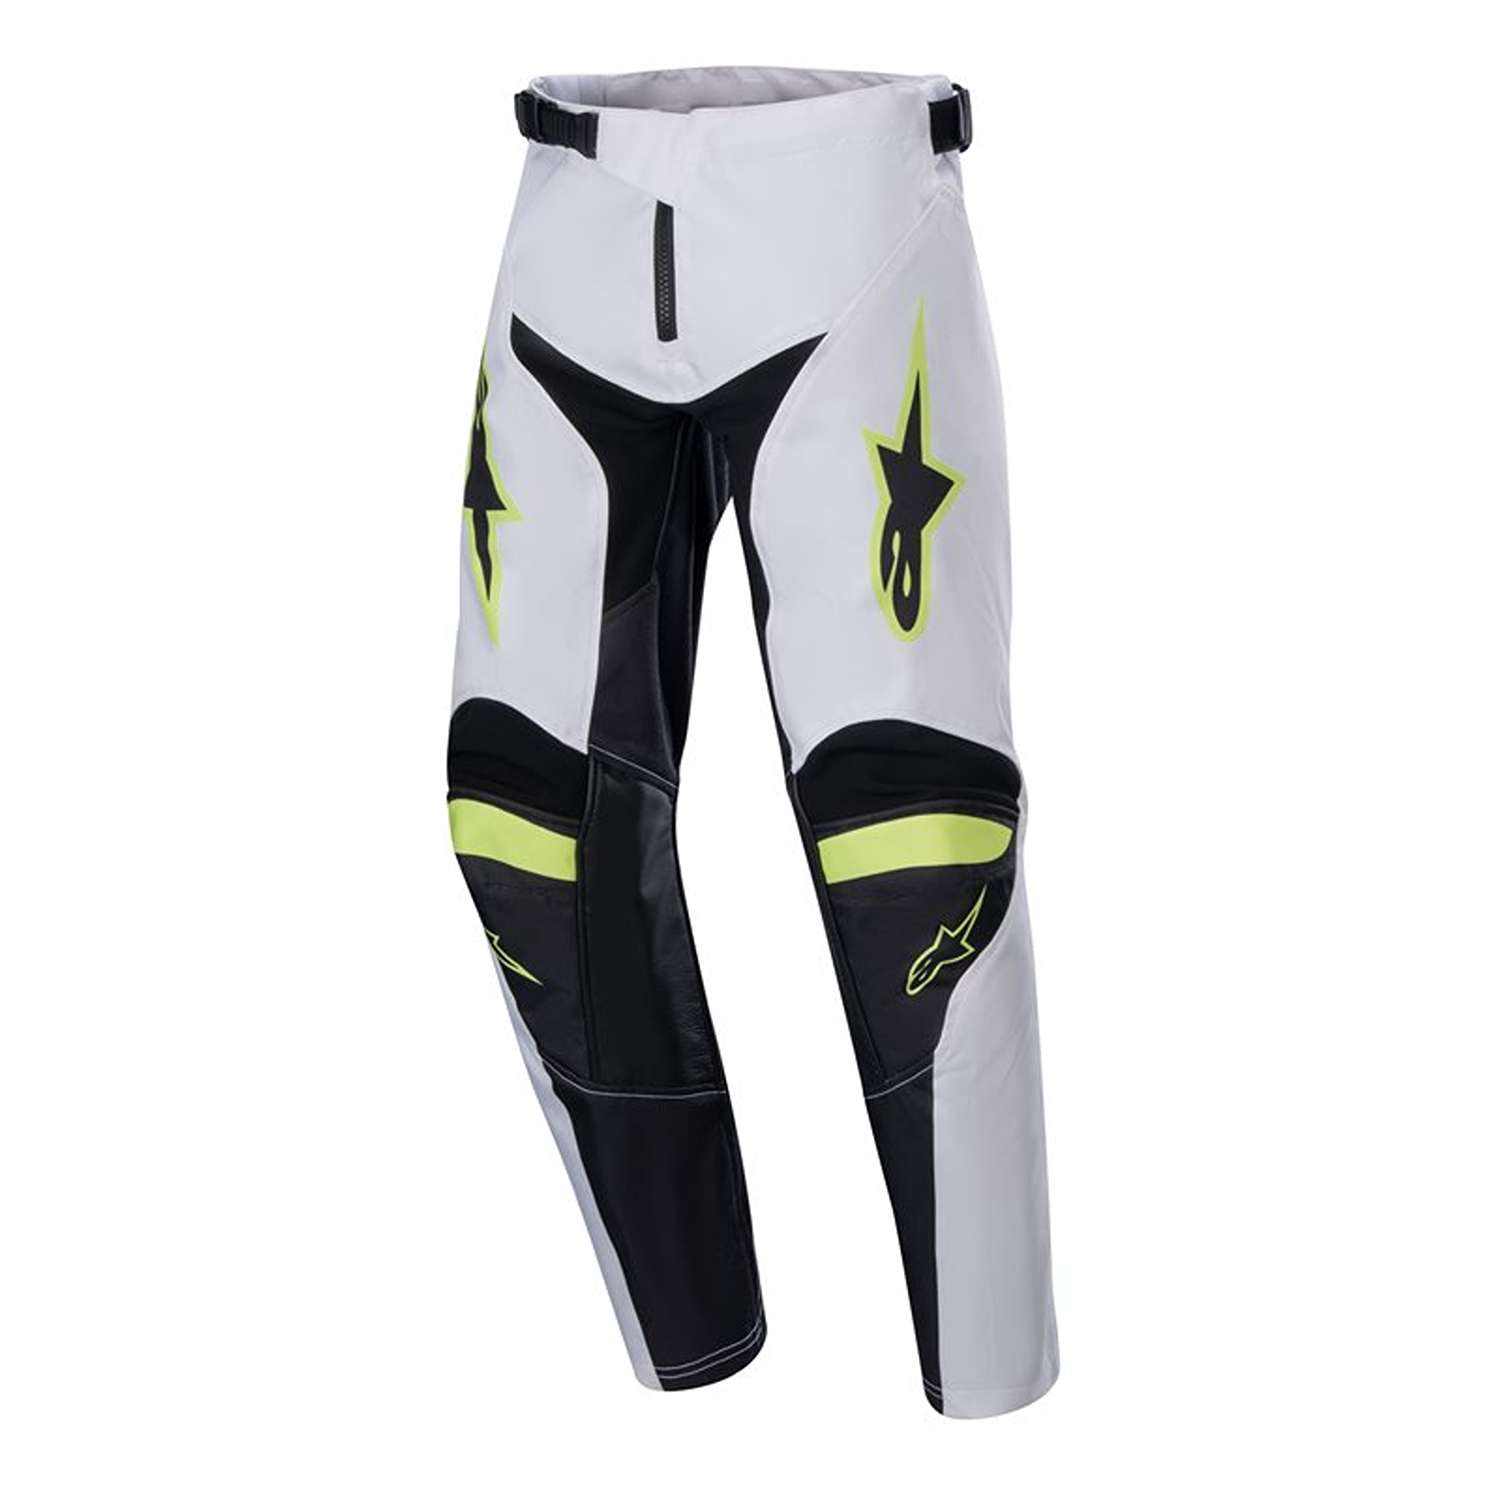 Image of Alpinestars Youth Racer Lucent Pants White Neon Red Yellow Fluo Talla 28